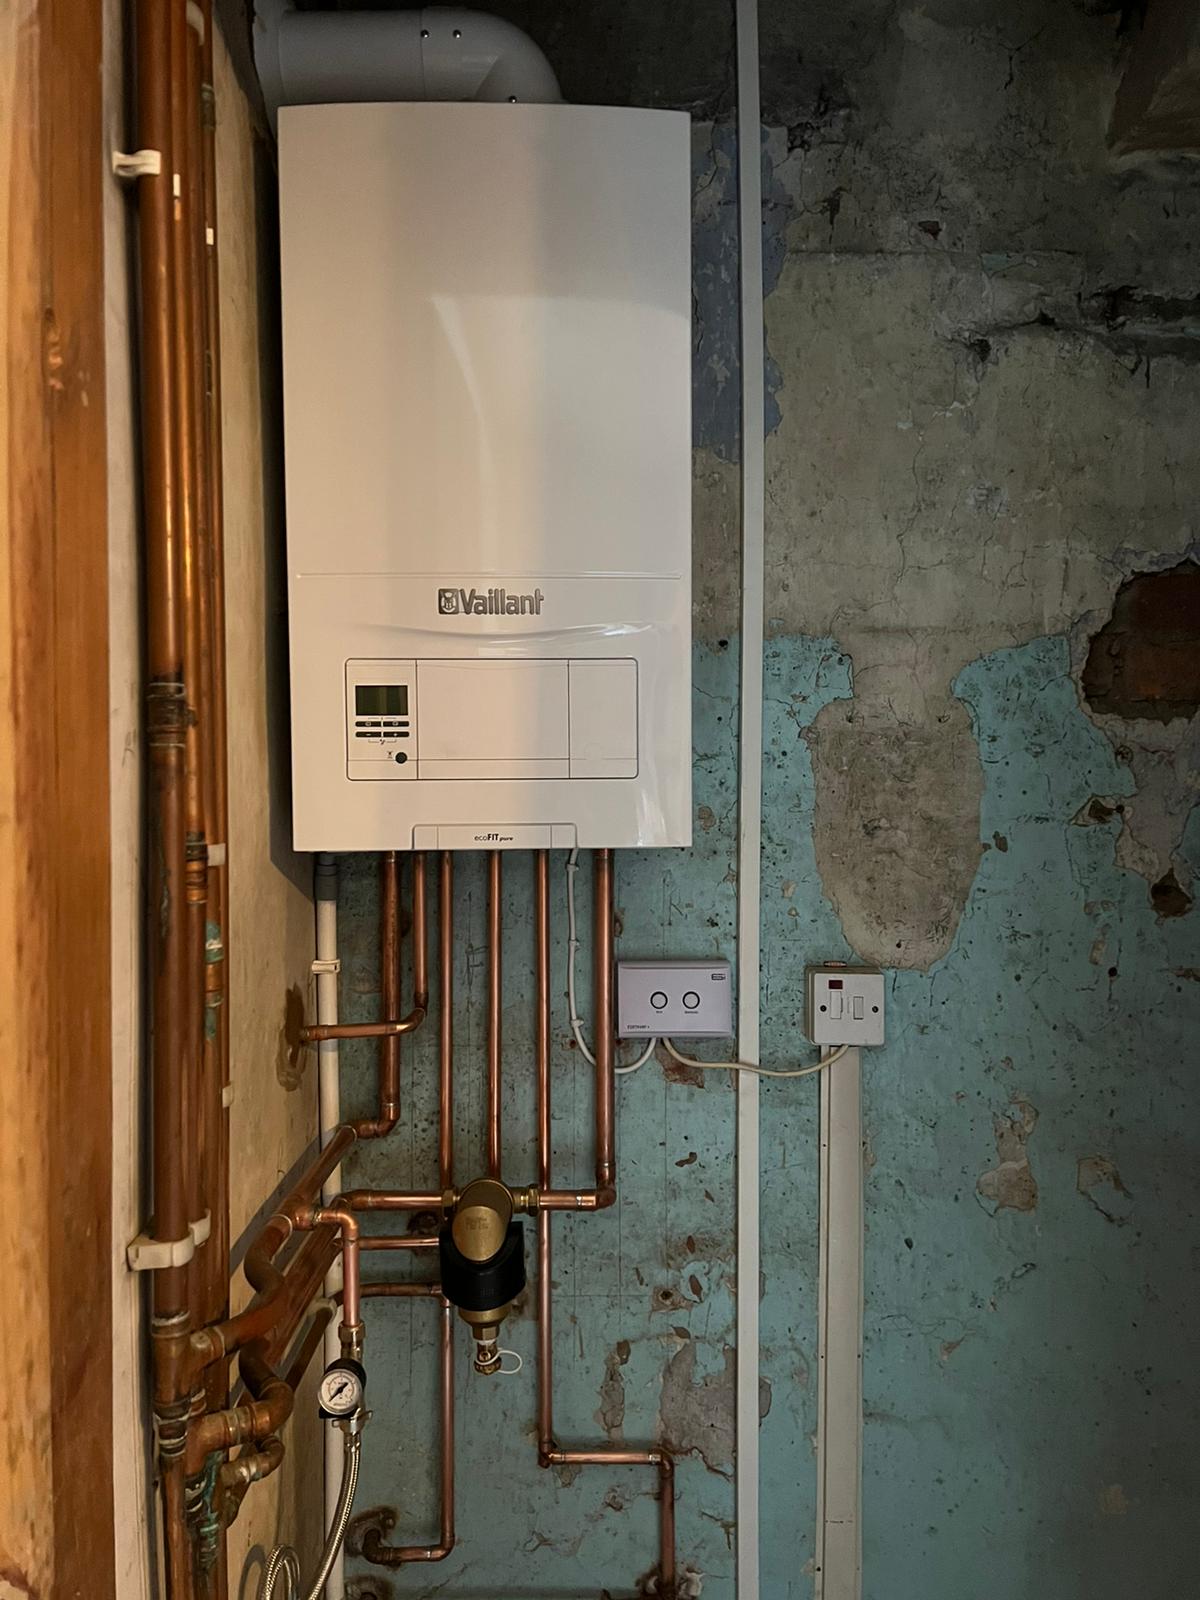 combi boiler swap new Vaillant ecoFIT Pure 825 boiler installed, plus 4 new radiators and powerflushed system.